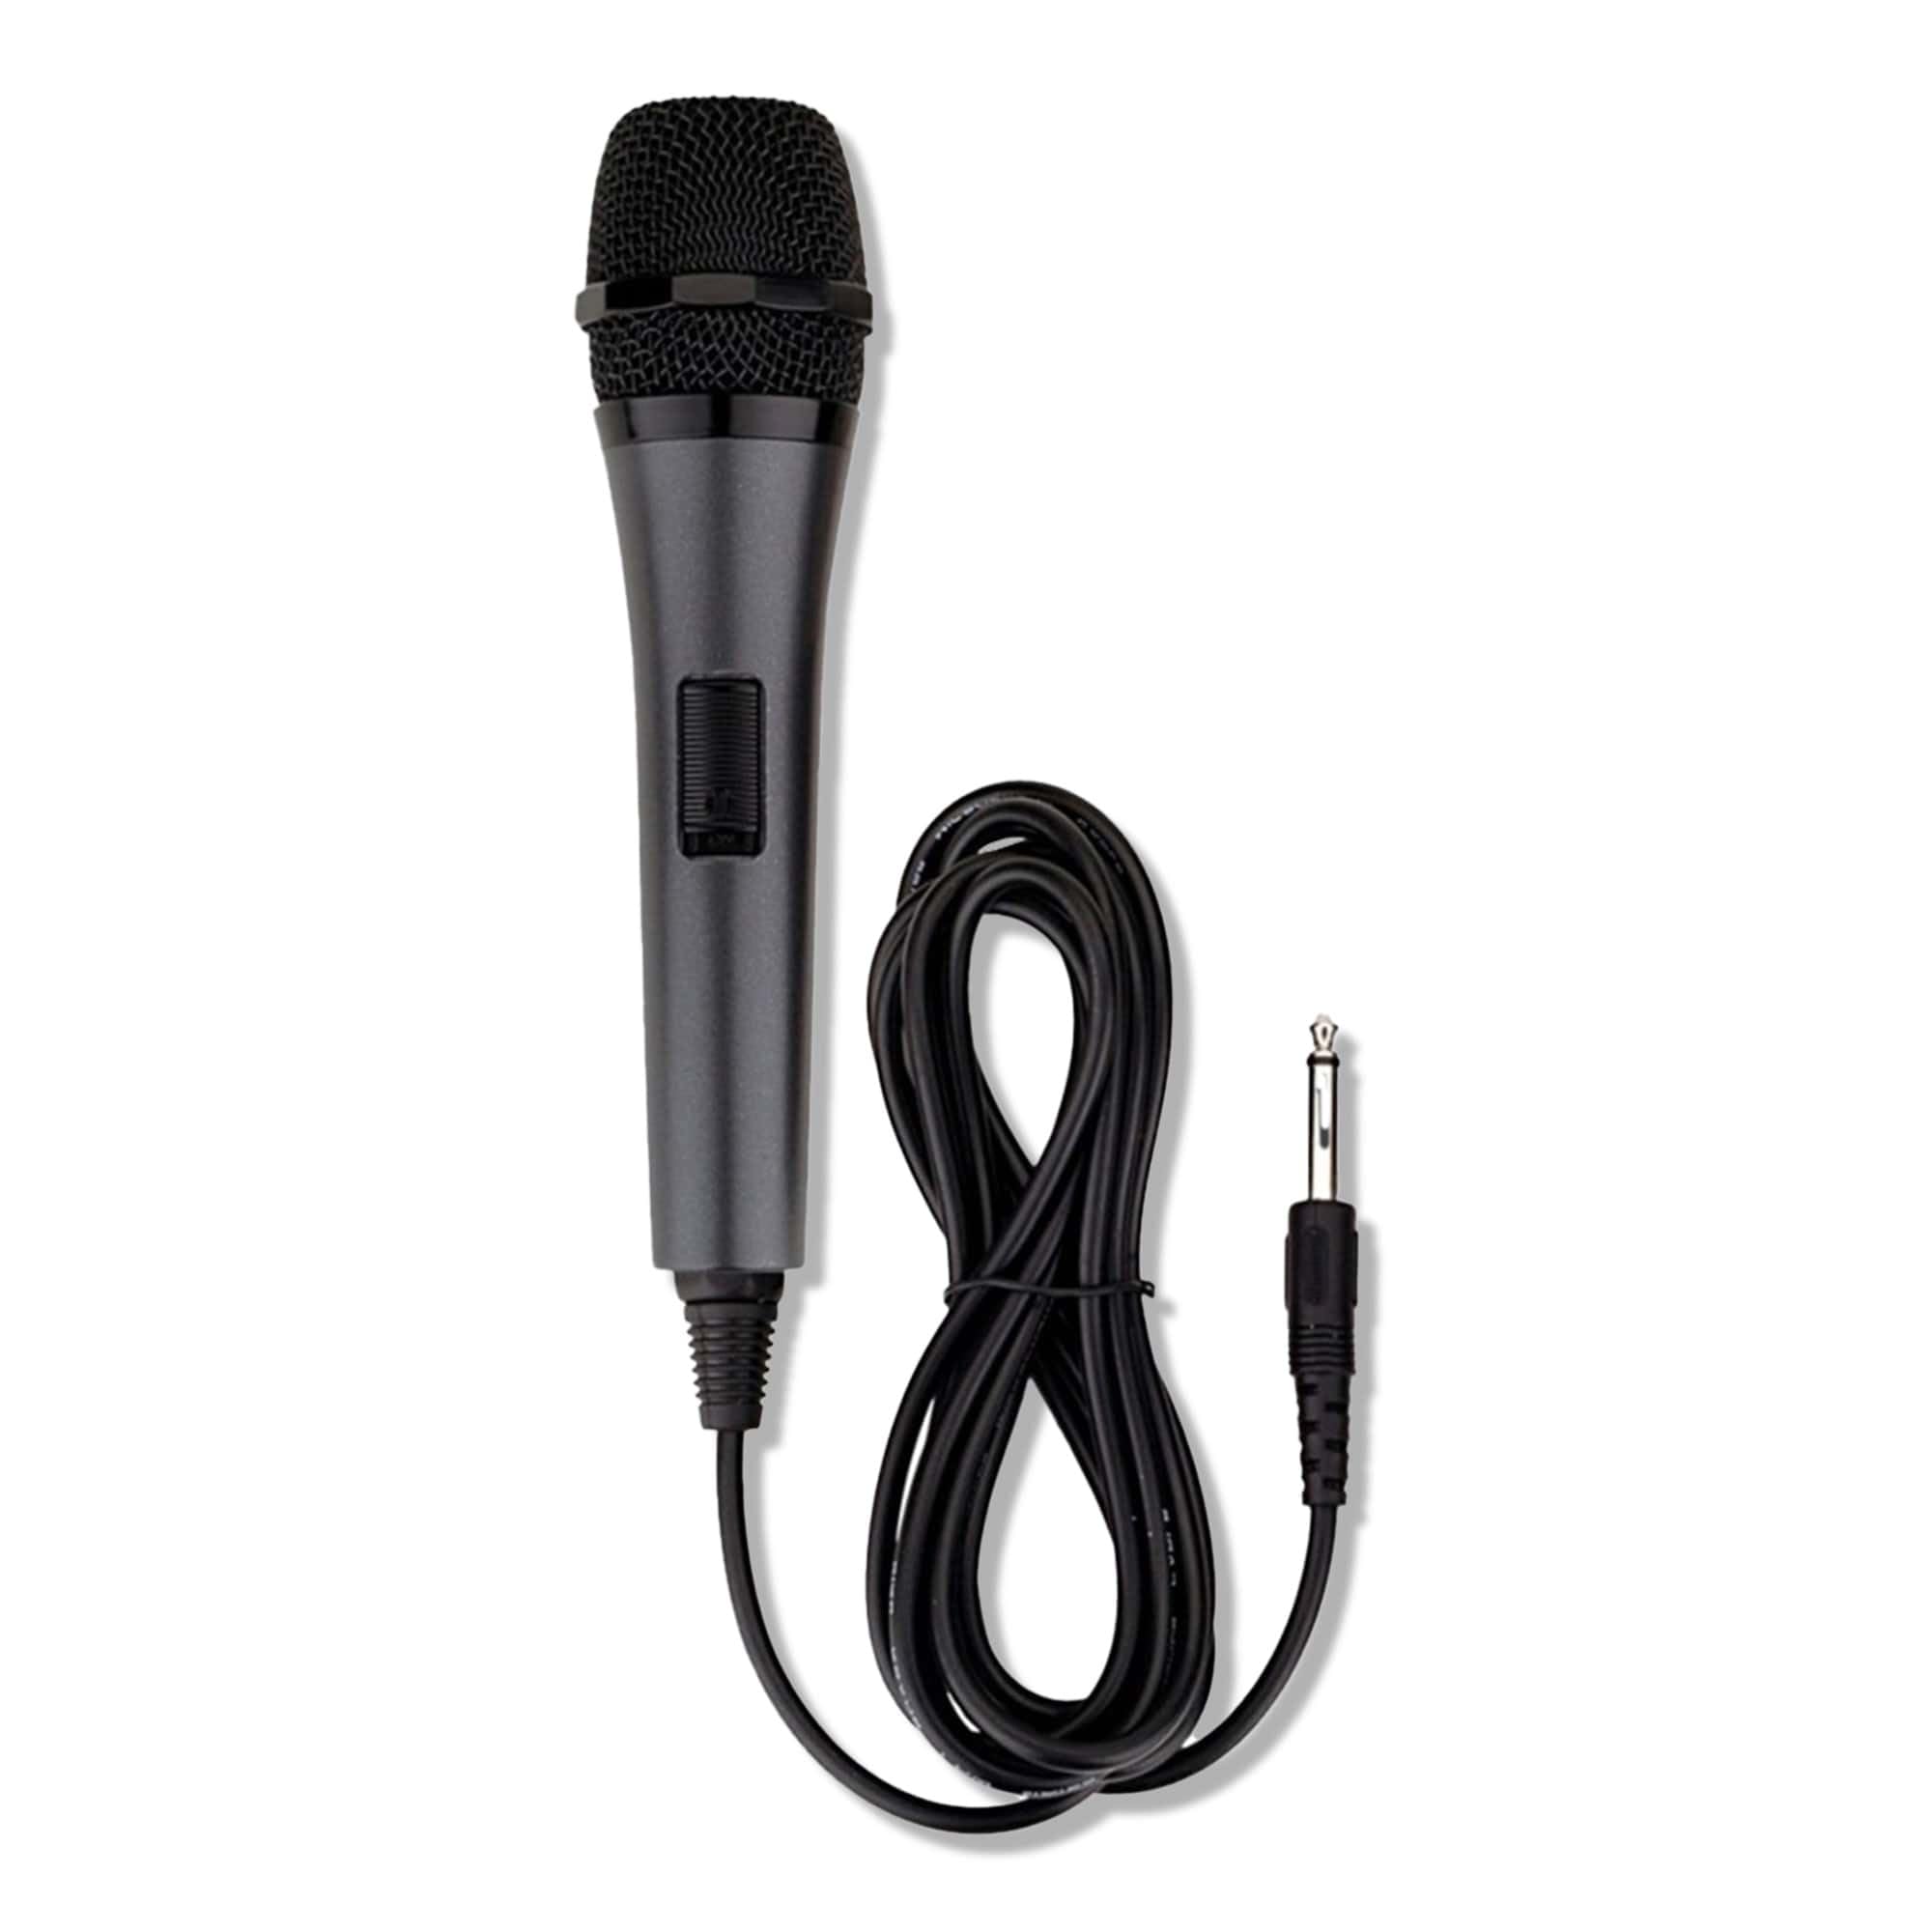 10.5' The Singing Machine Unidirectional Microphone w/ 6.3mm Plug & 3.5mm Adapter (Black or Pink) $3.56 + Free Shipping w/ Prime or on $35+